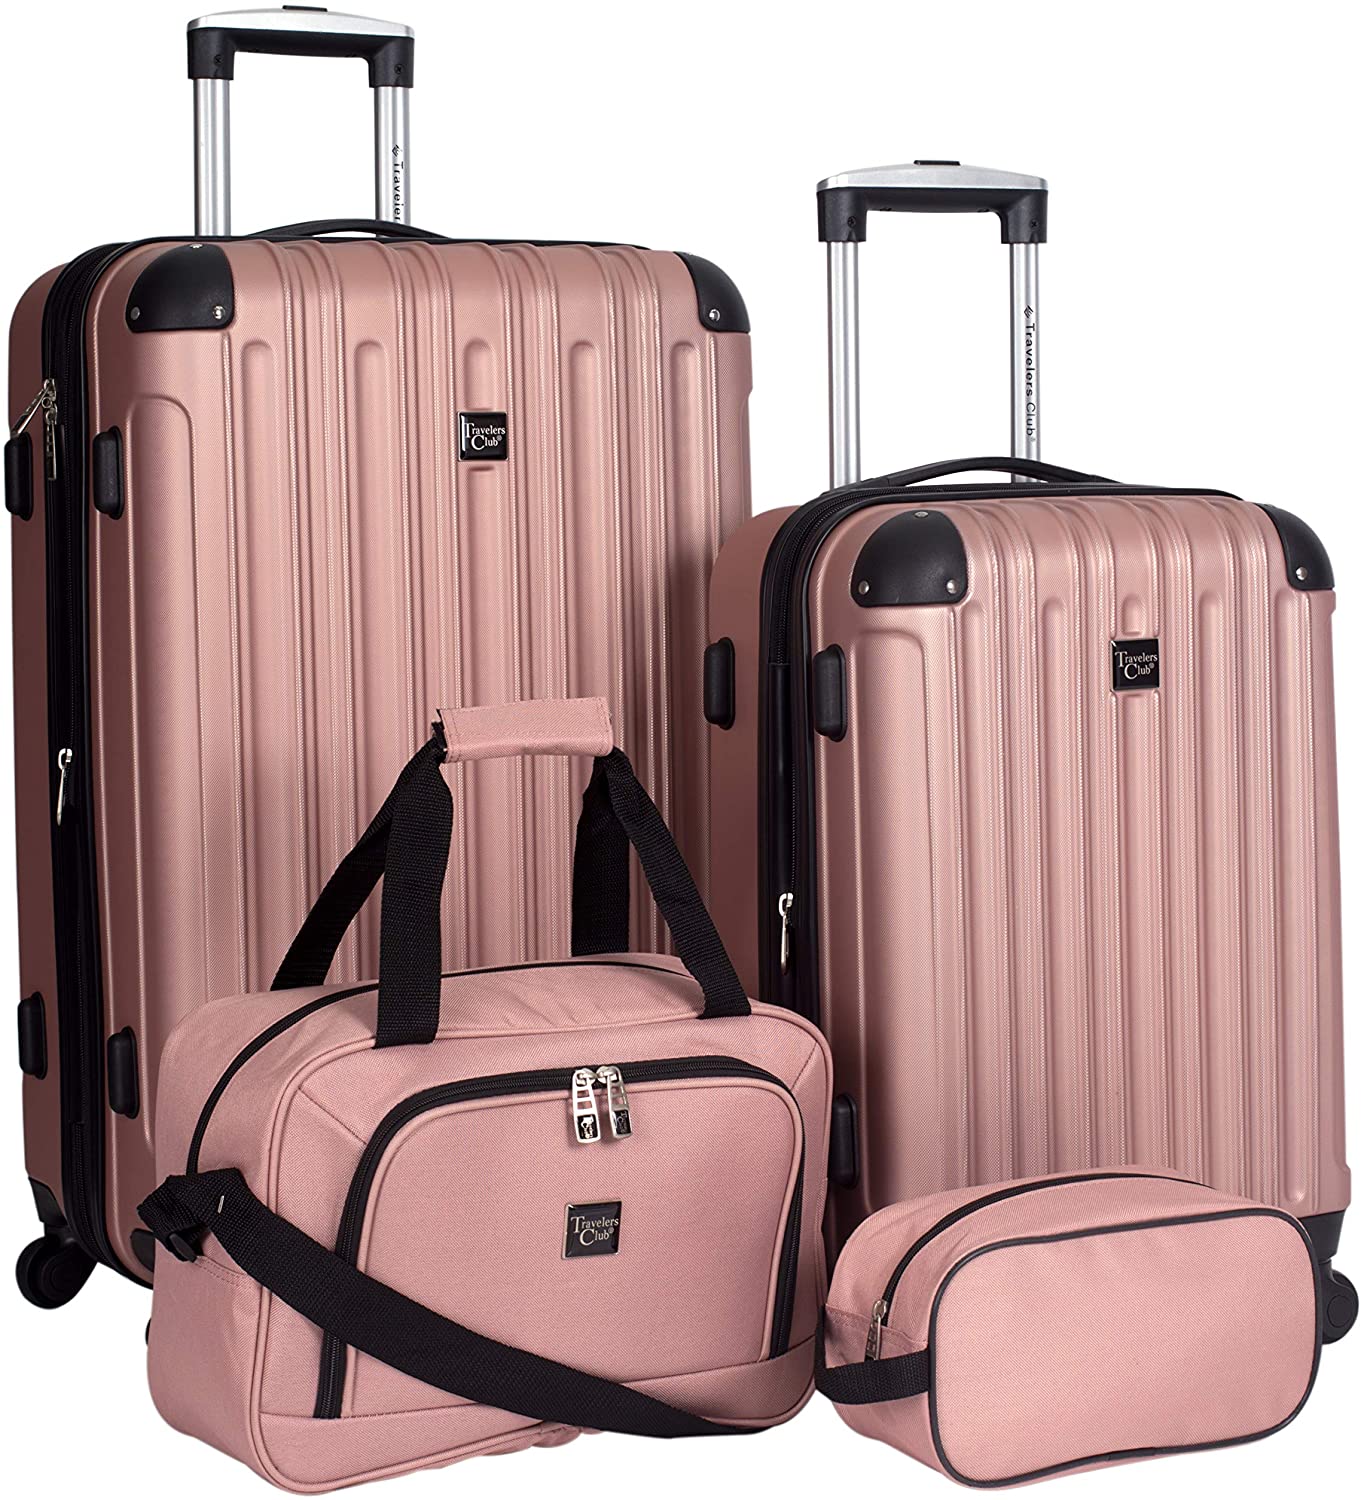 Travelers Club Midtown Hard Shell Suitcase, 4-Piece